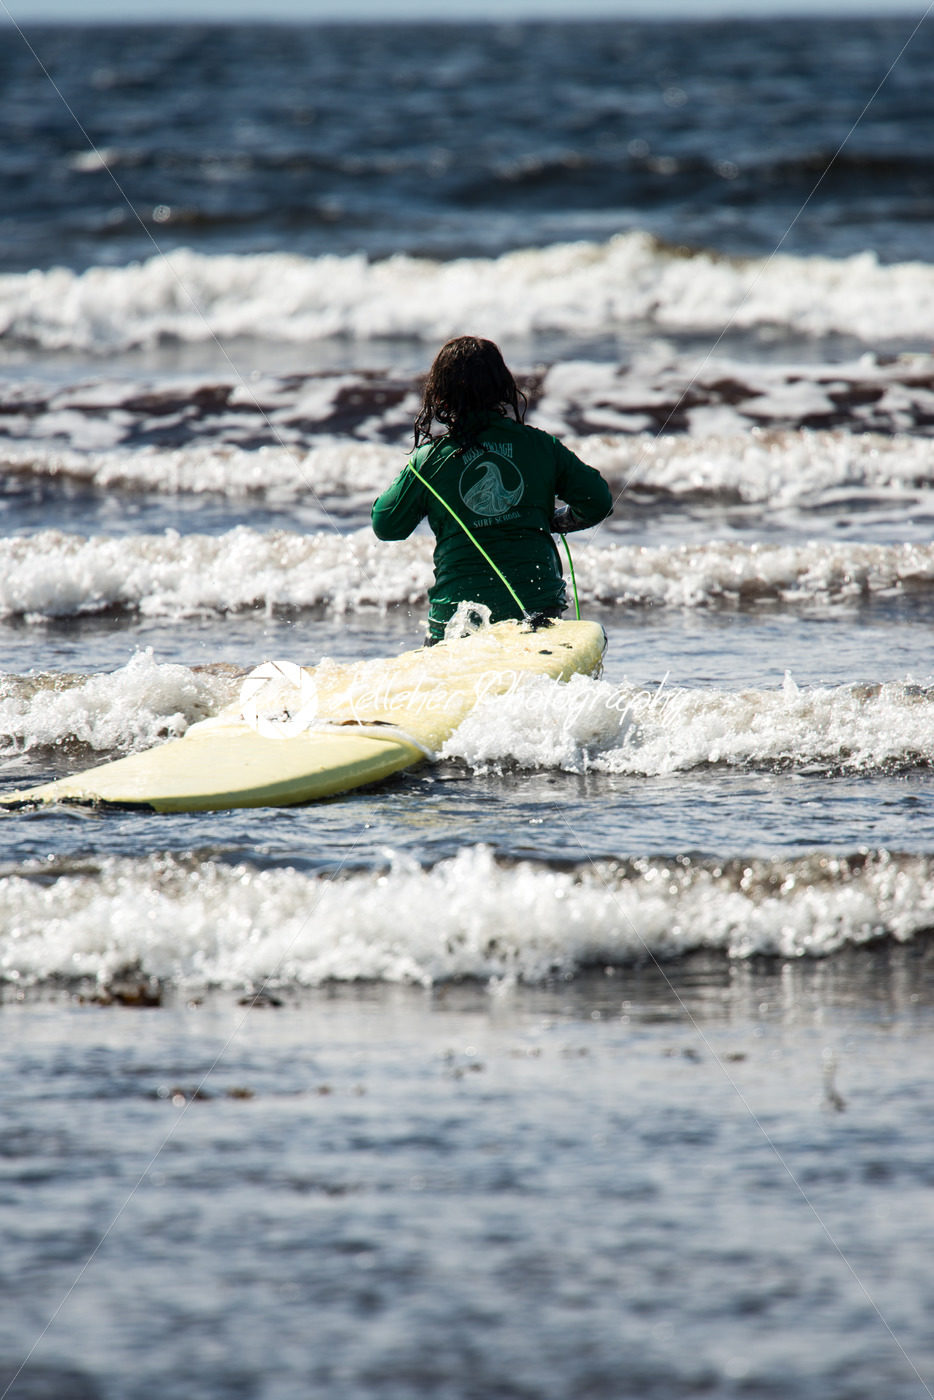 Young little girl on beach taking surfing lessons - Kelleher Photography Store